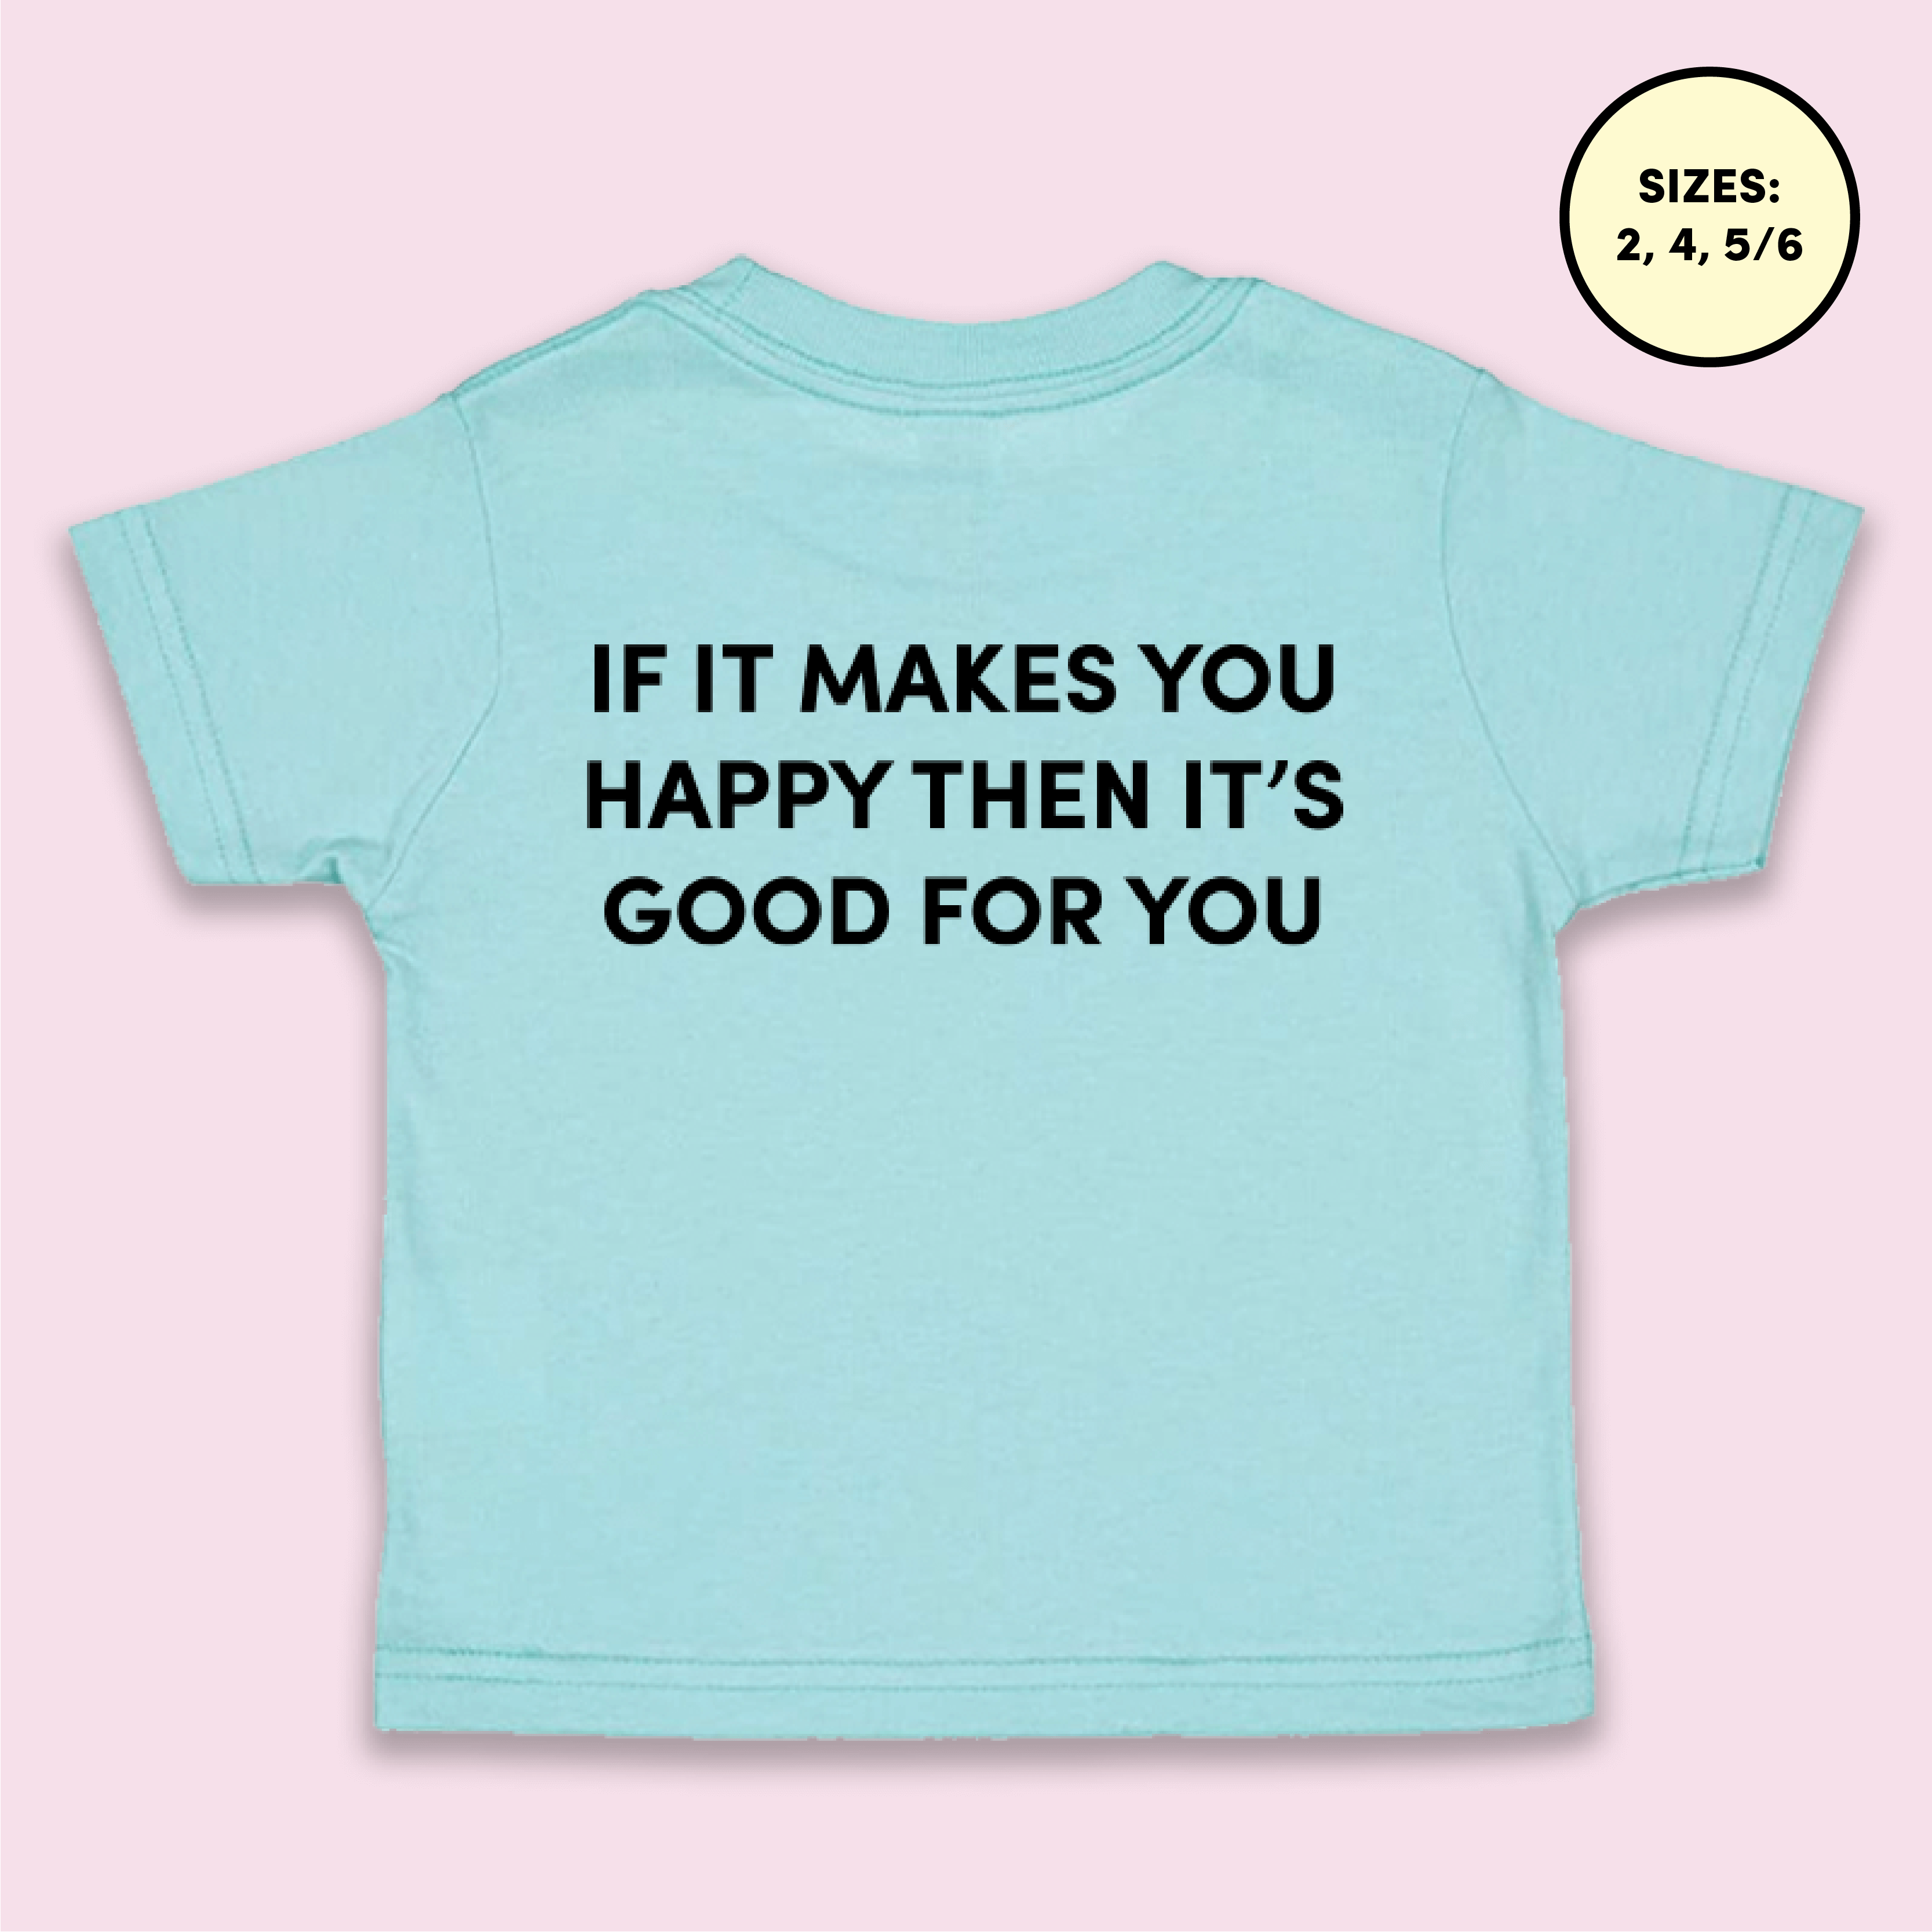 'IF IT MAKES YOU HAPPY' Toddler T-shirt Image 3. 